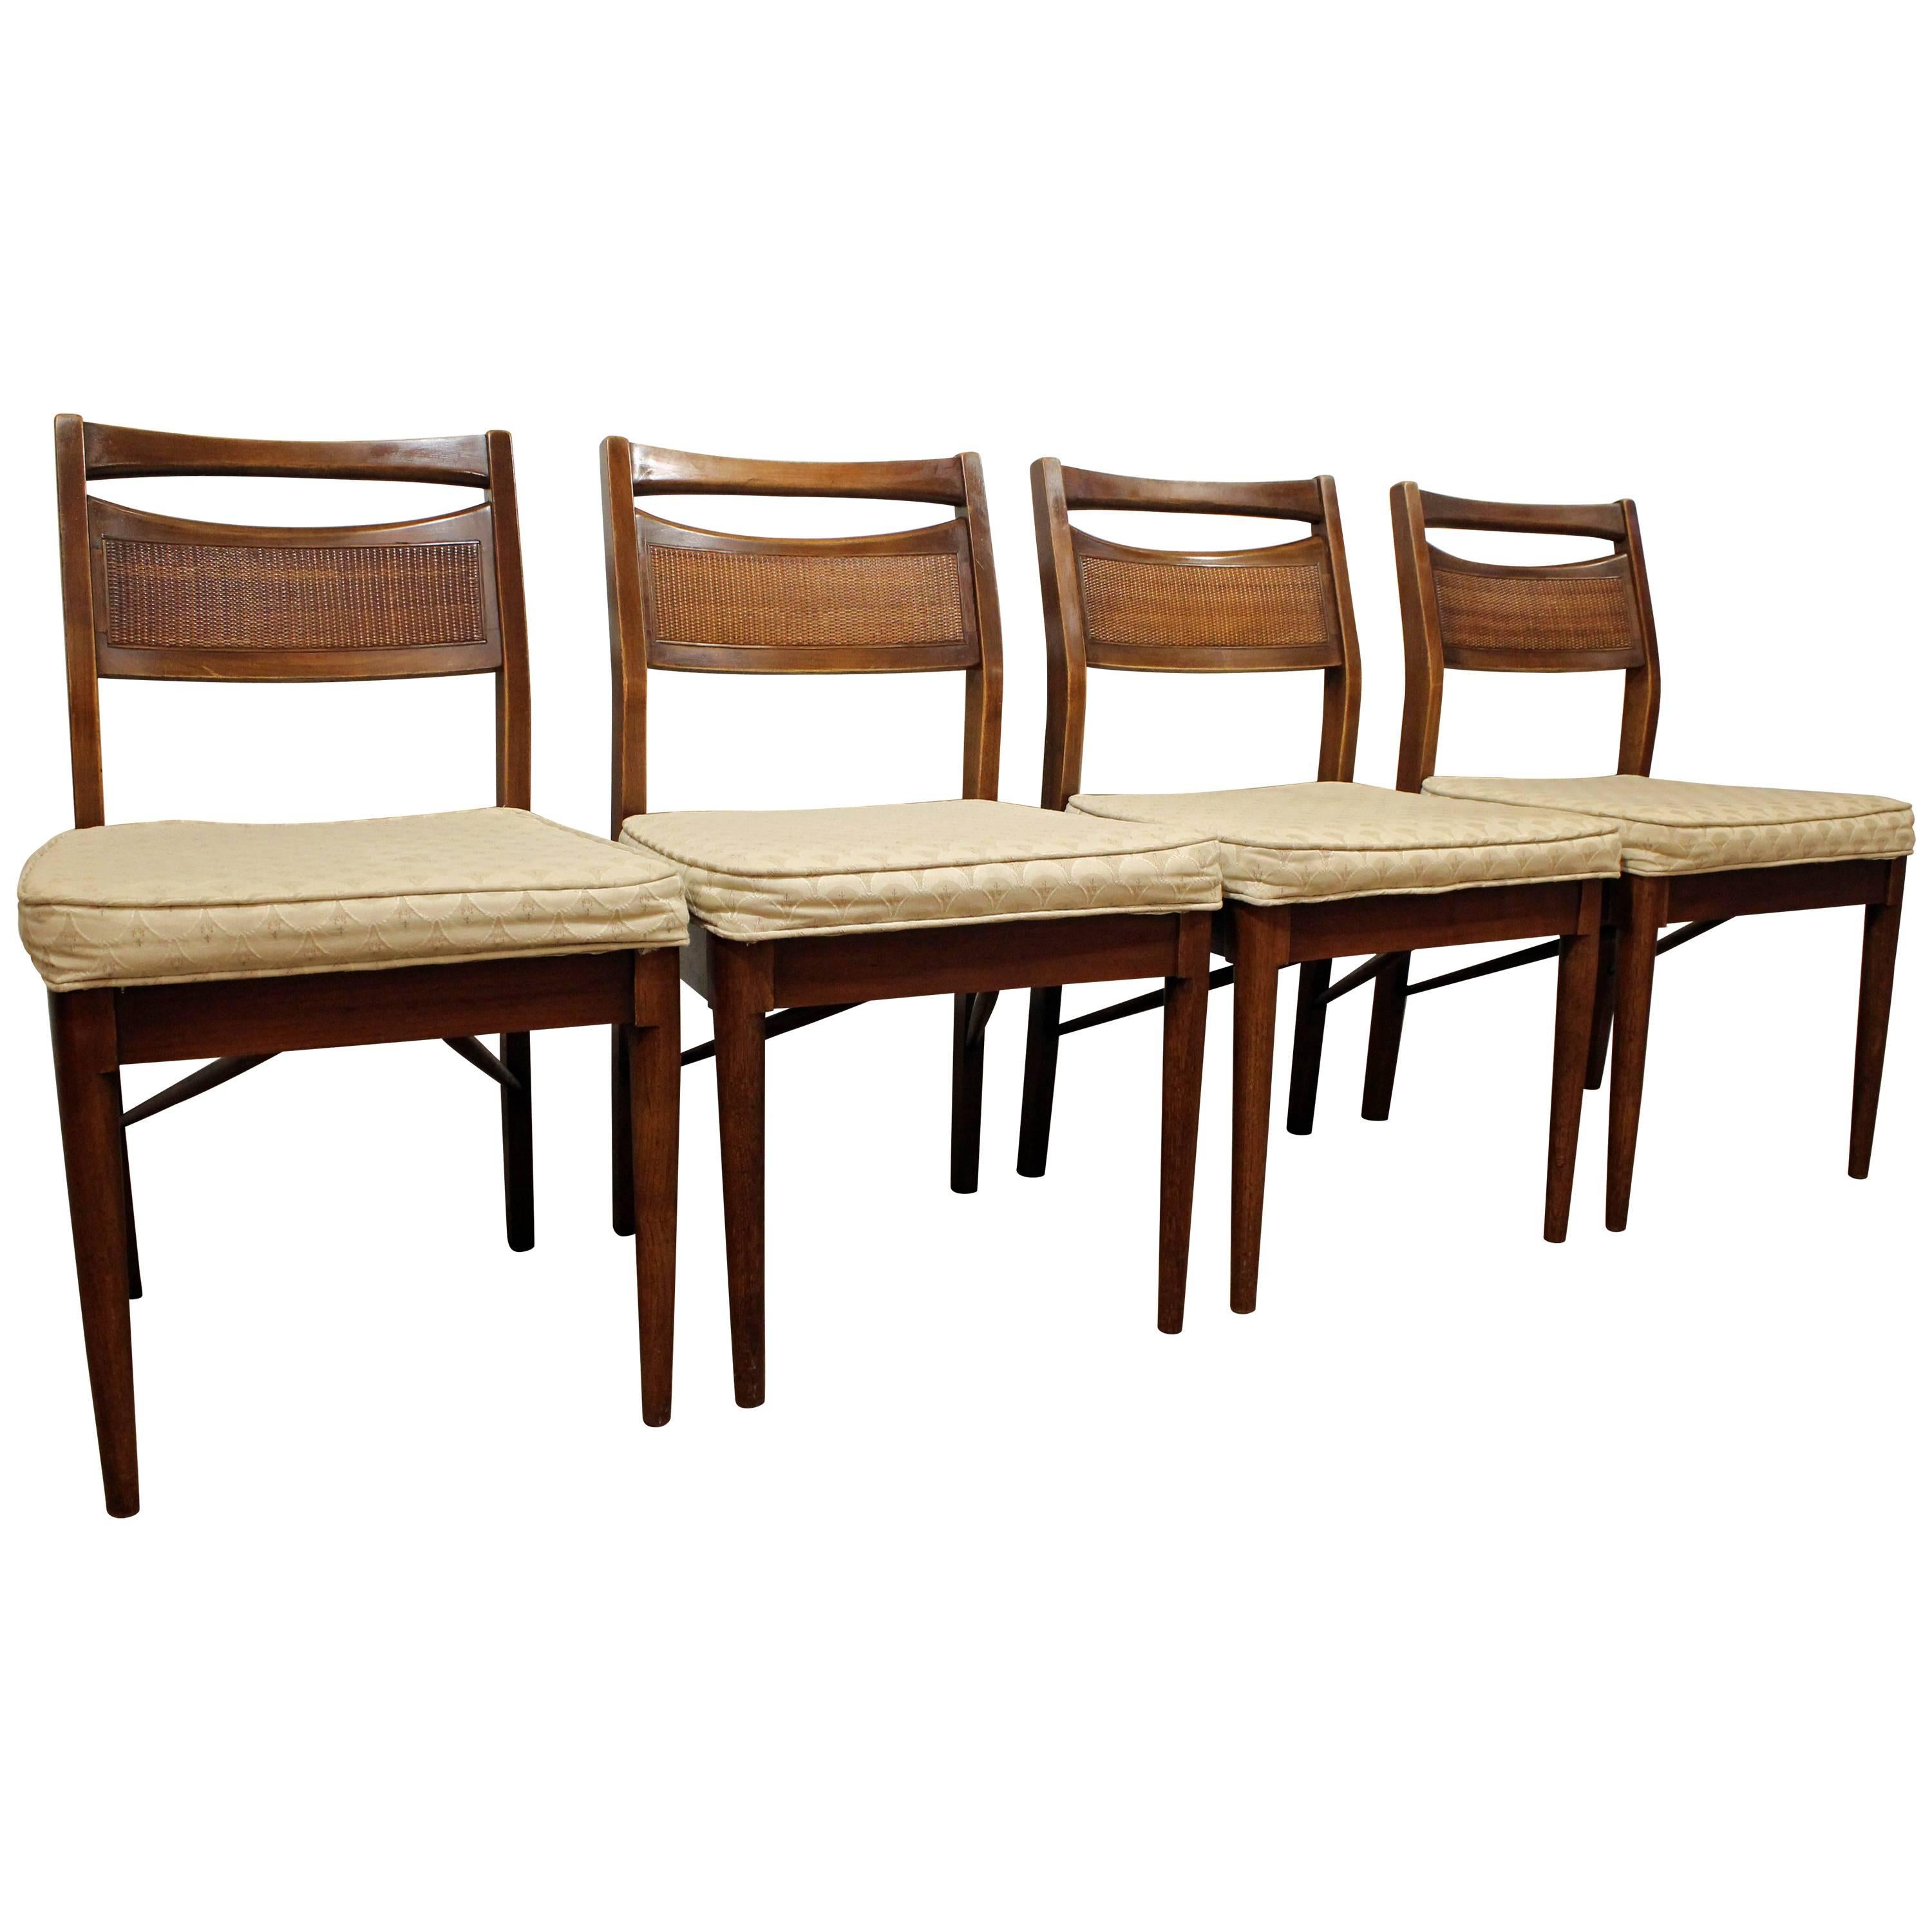 Set of Four Mid-Century Modern American of Martinsville Walnut Dining Chairs